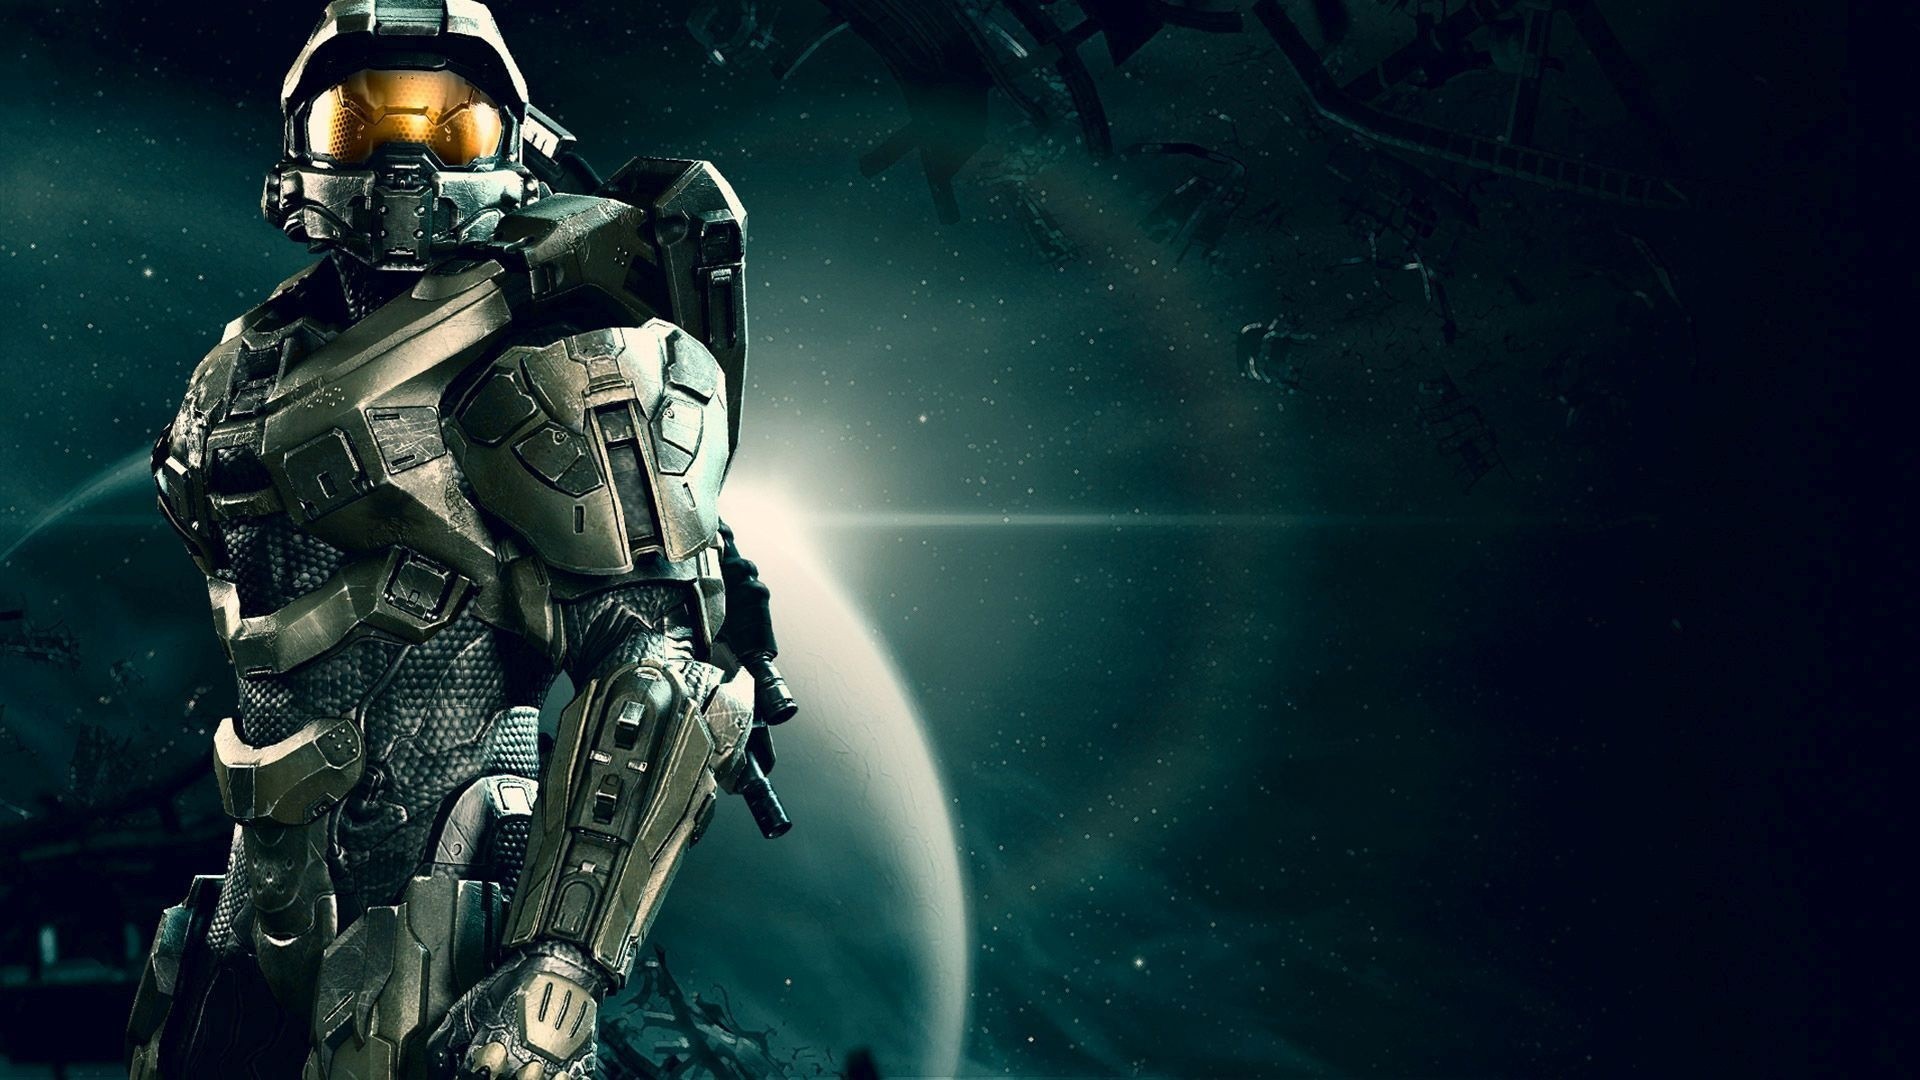 Video Games Halo Halo 4 Master Chief UNSC Infinity 343 Industries Xbox One Spartans Halo 1920x1080